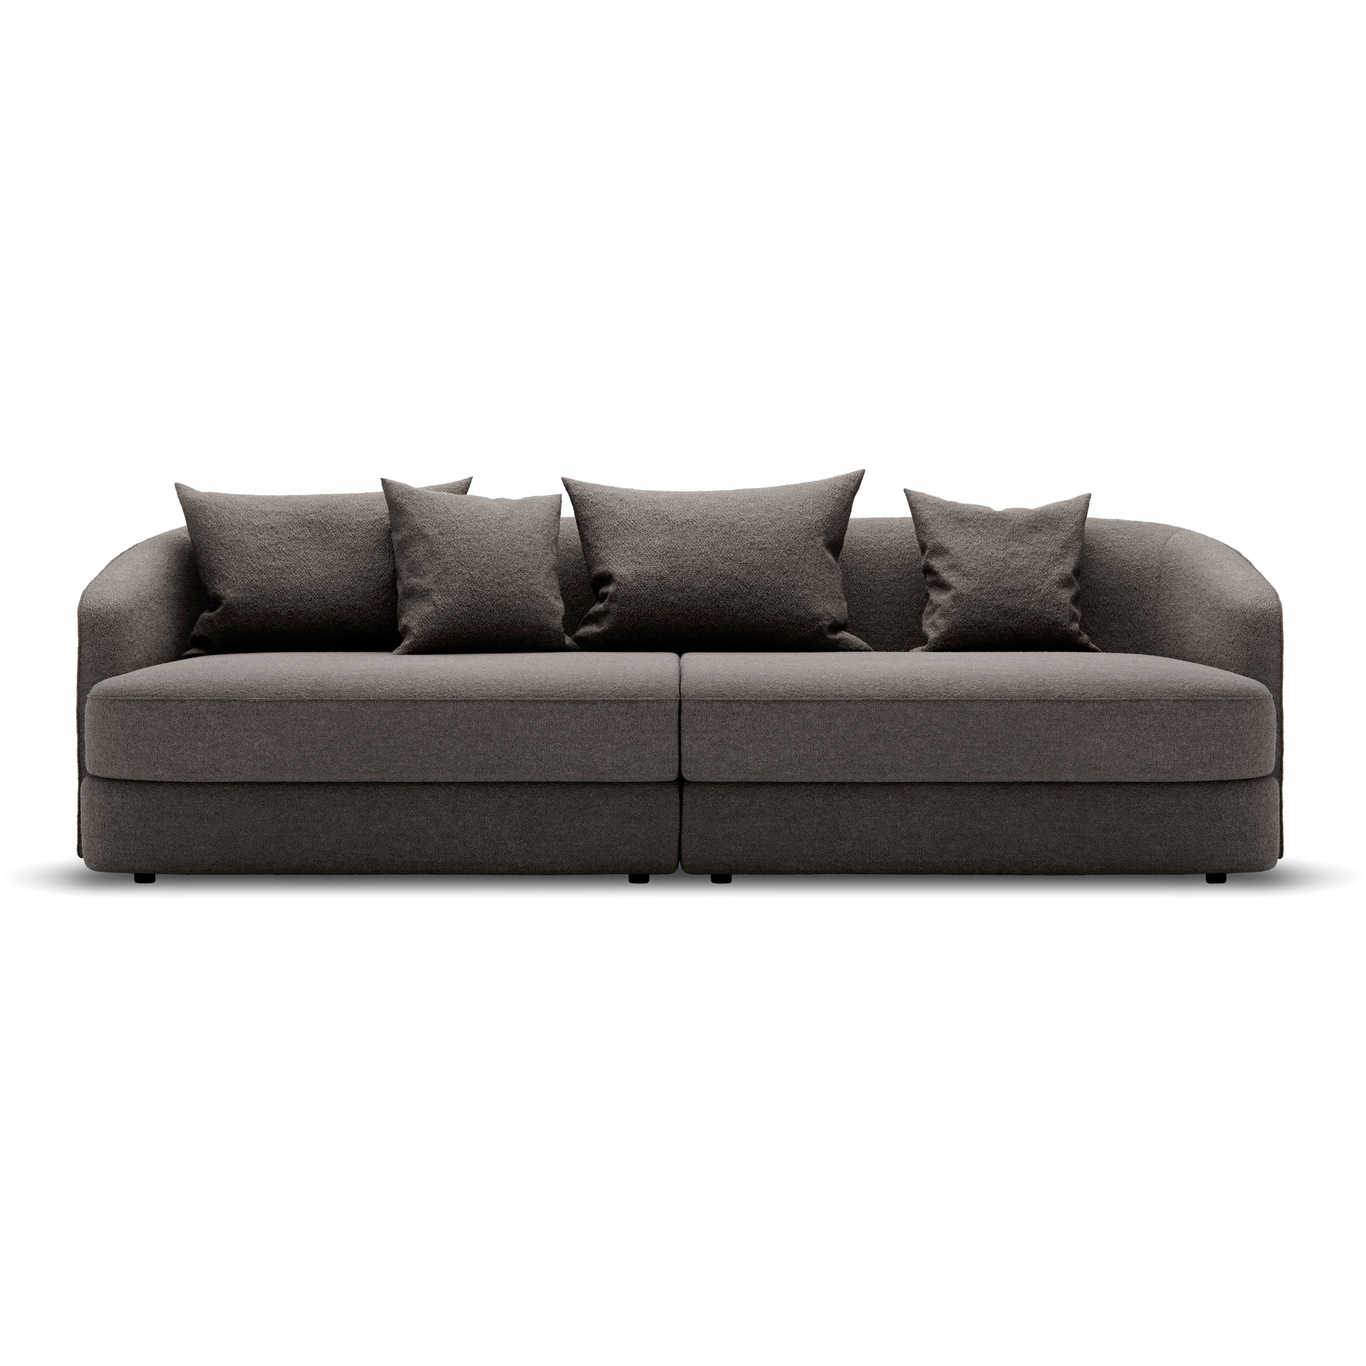 Covent Residential Sofa, Dark Taupe